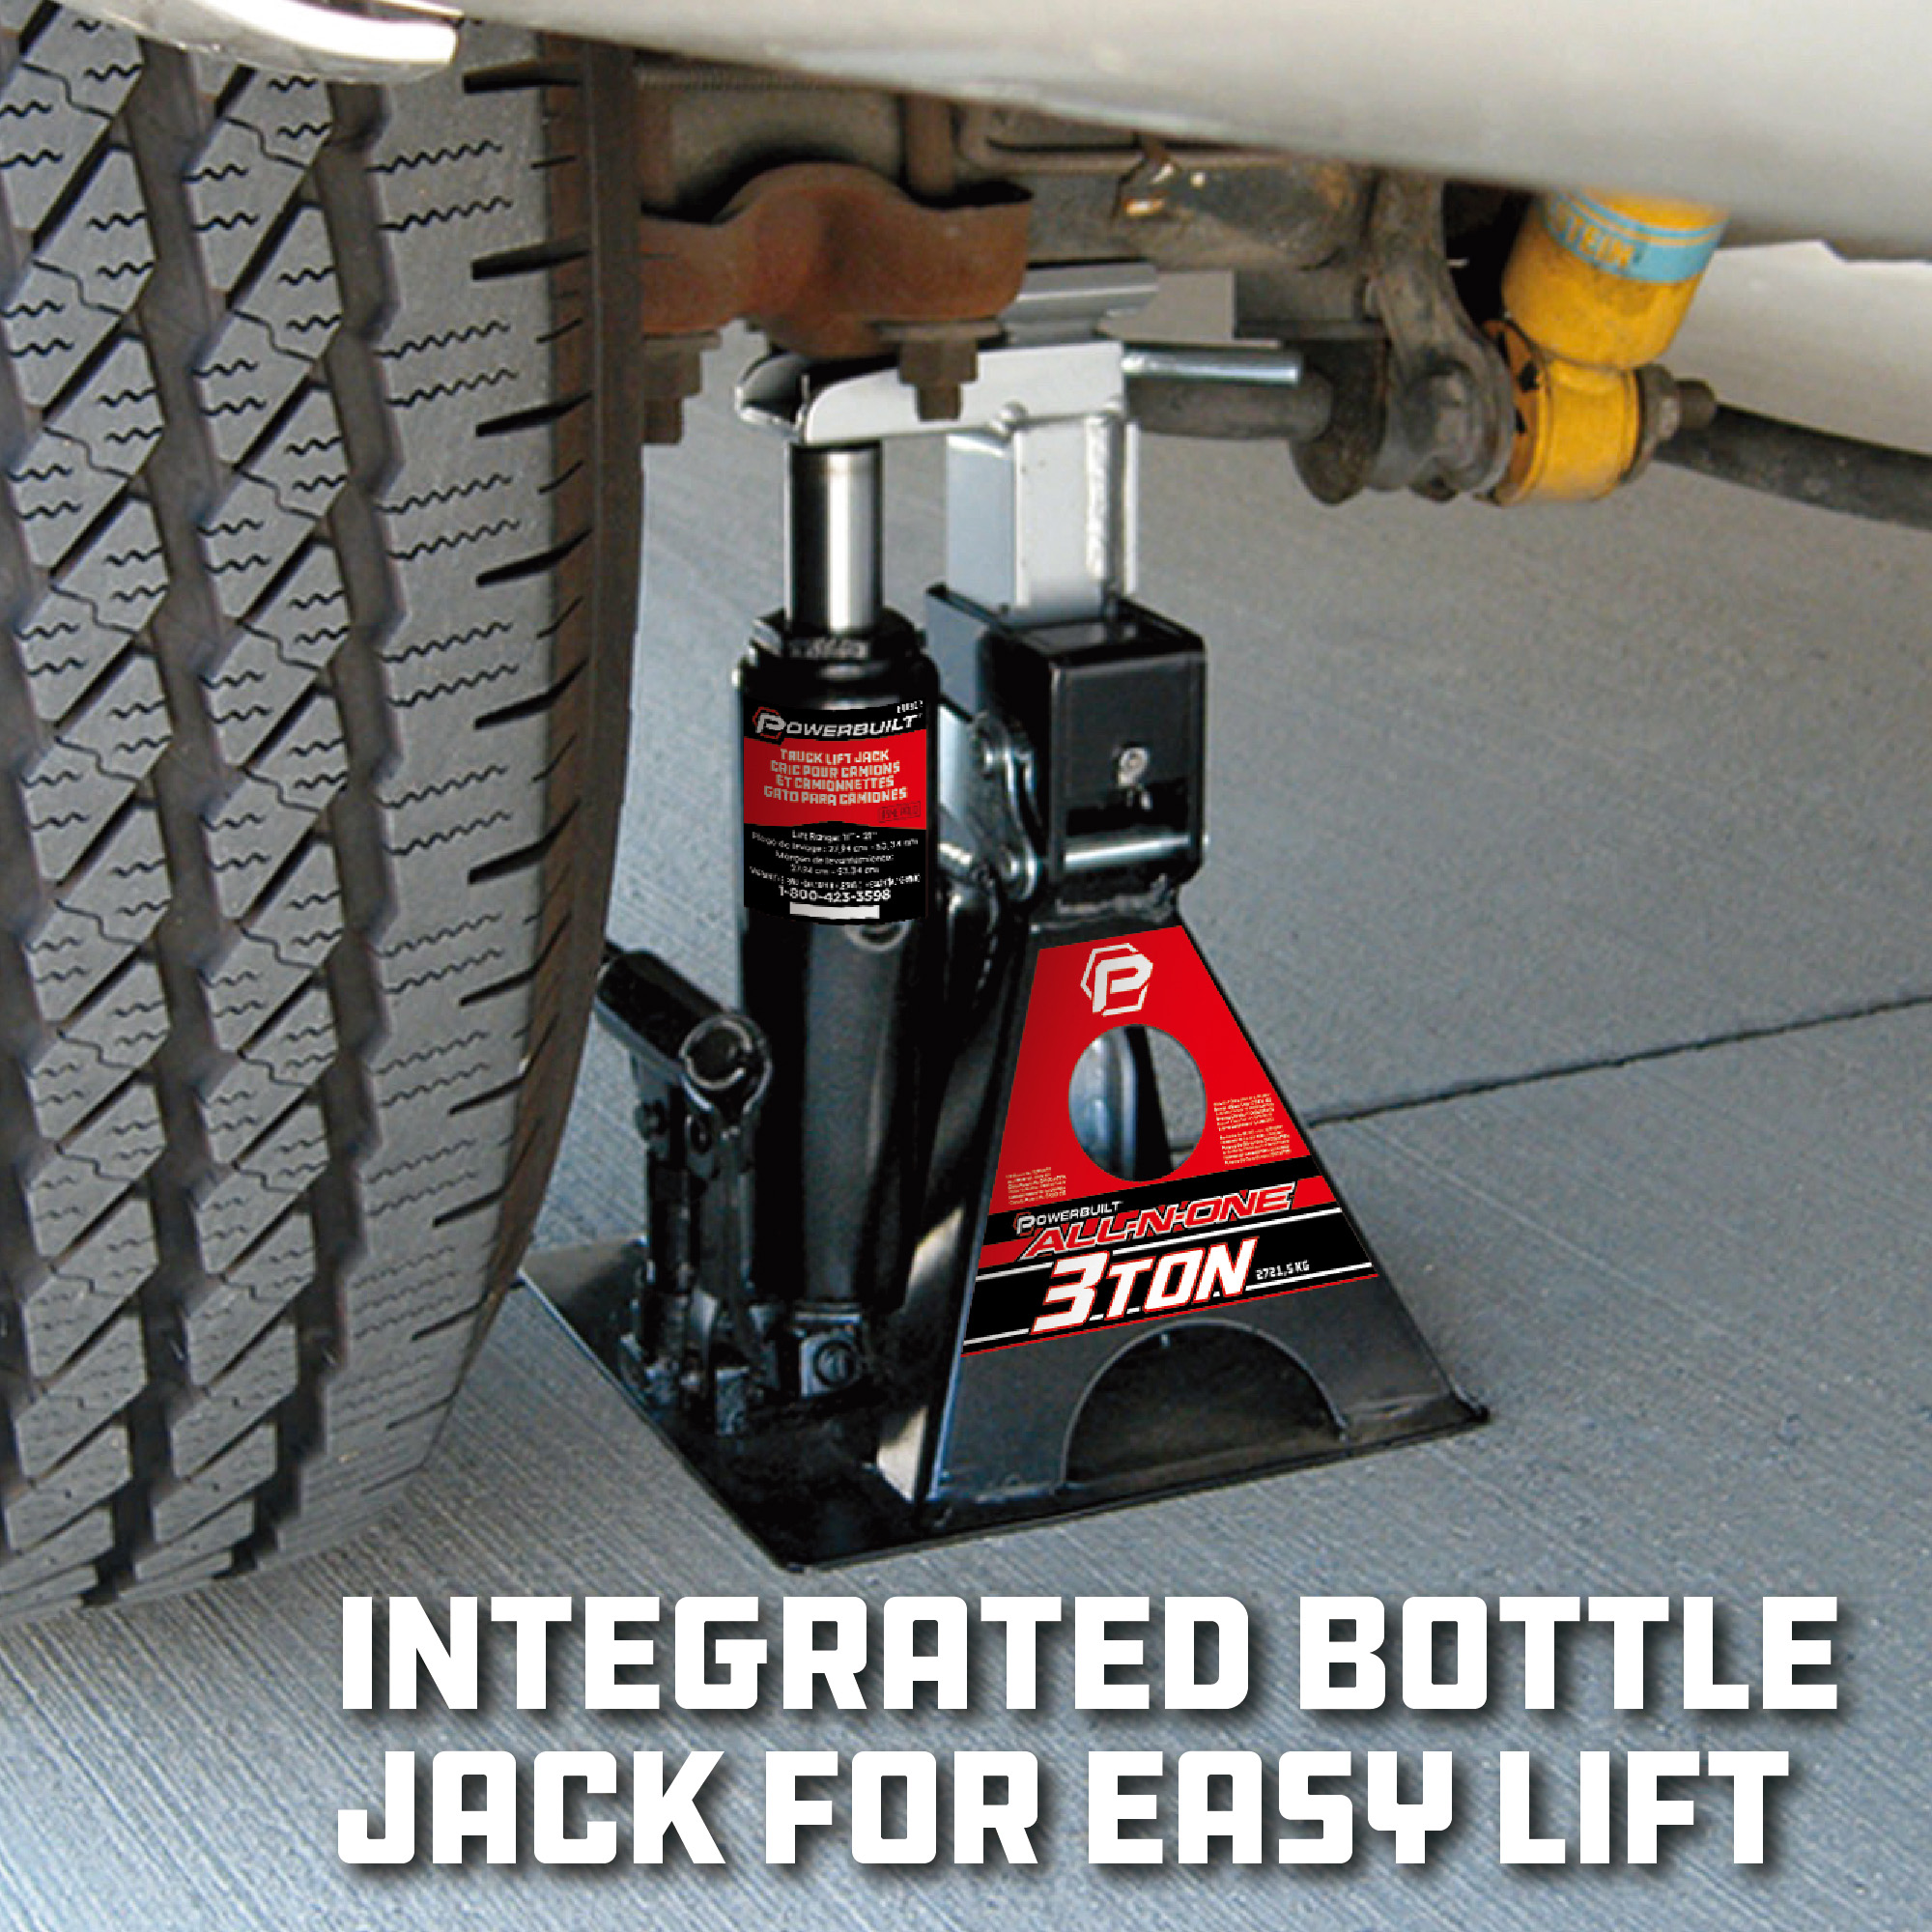 Powerbuilt 3 Ton All-in-One Jackstand/Bottle Jack - 640912 - image 4 of 6